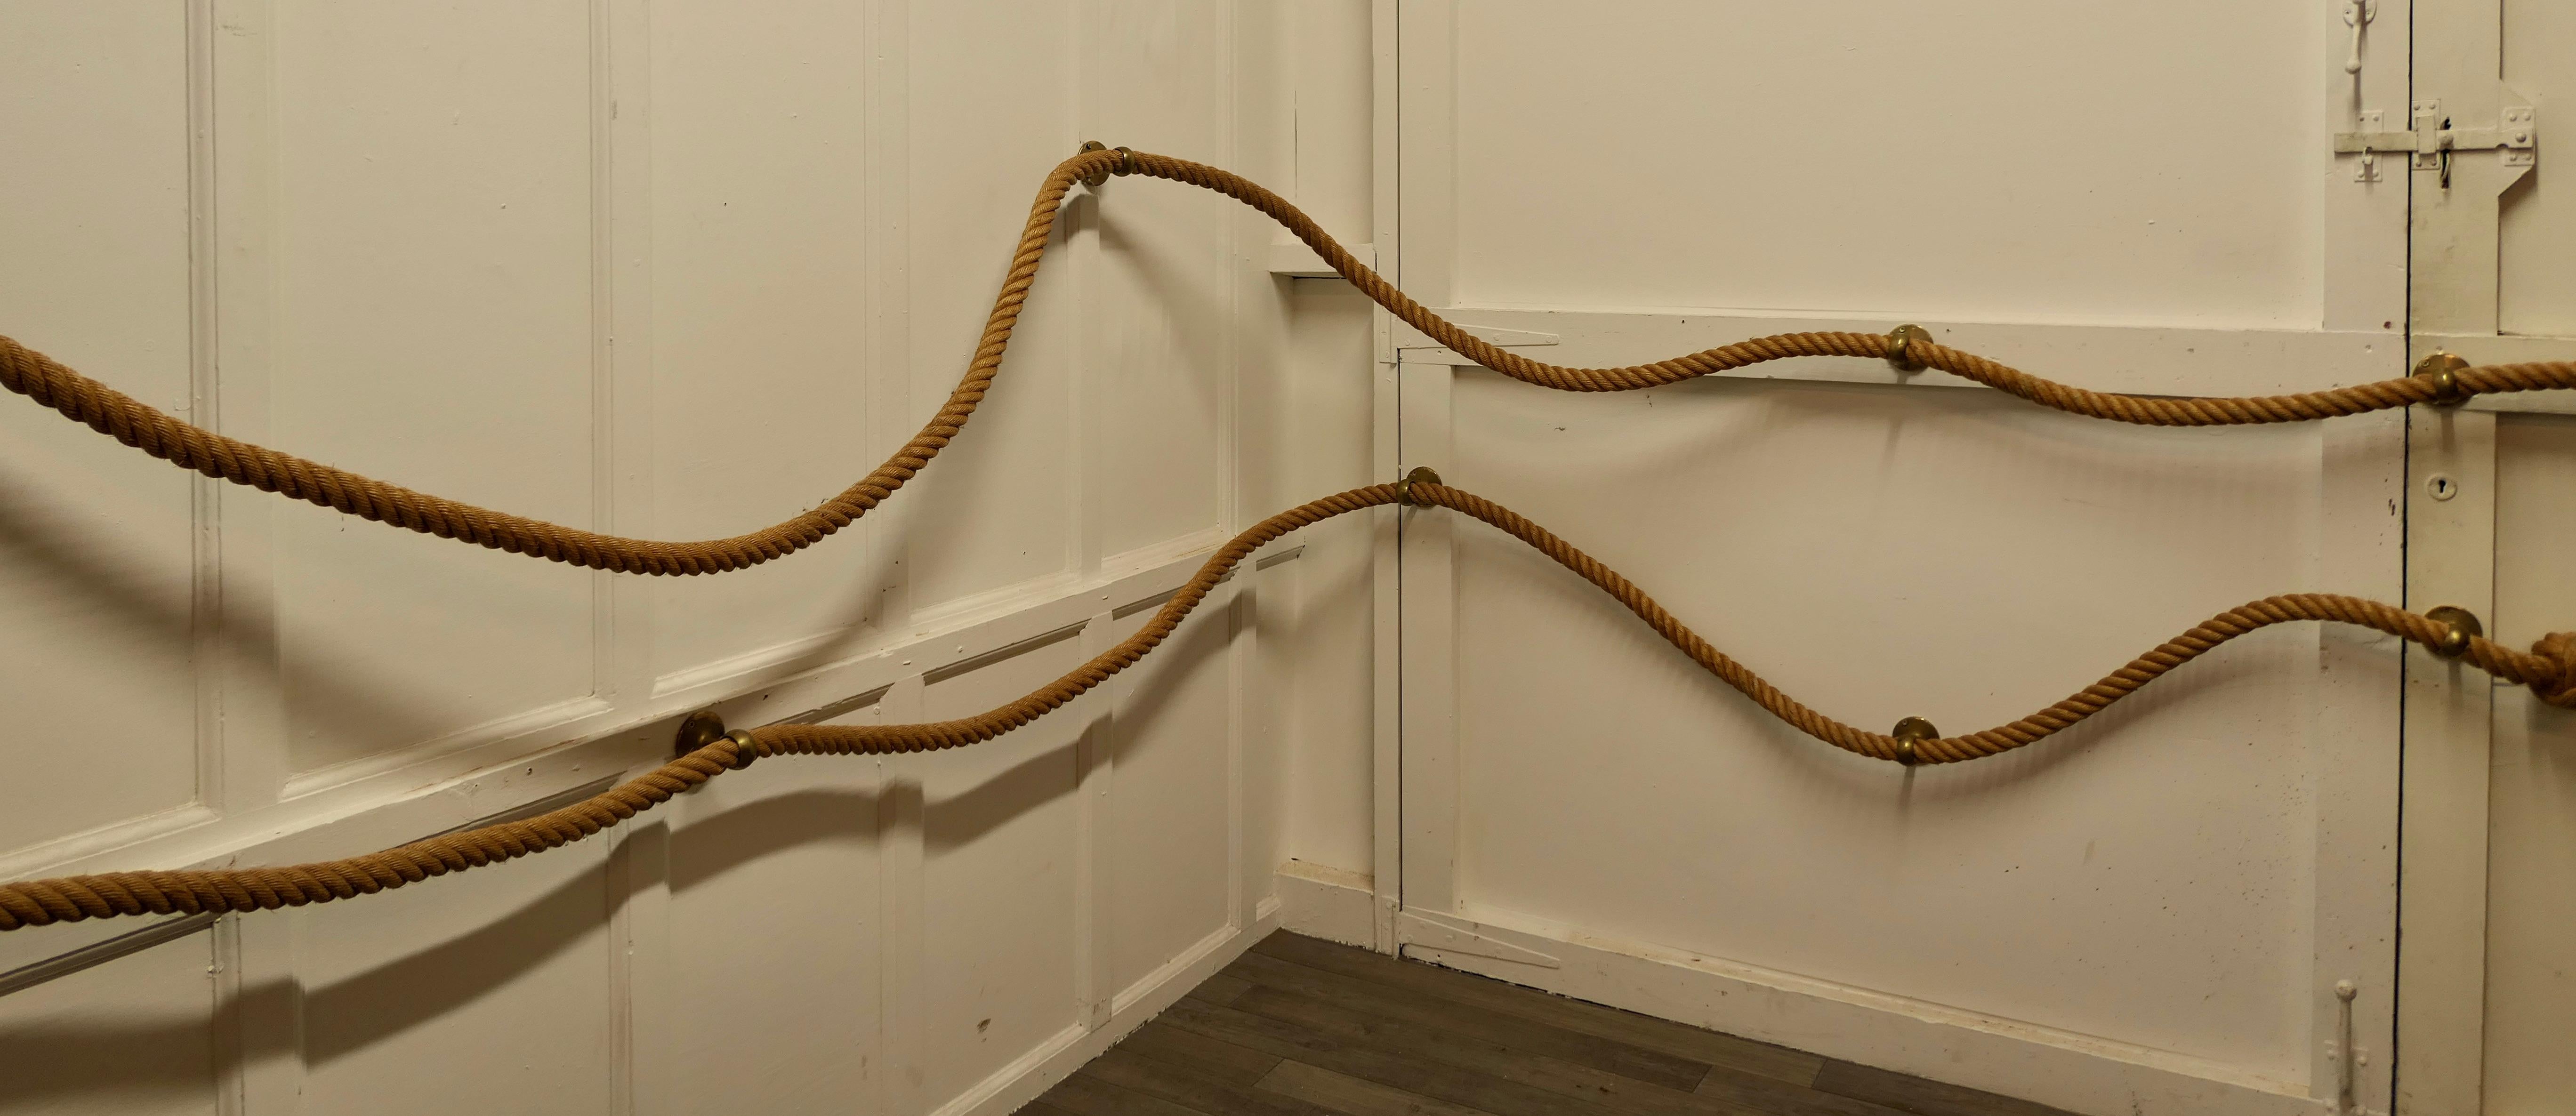 rope handrails for stairs